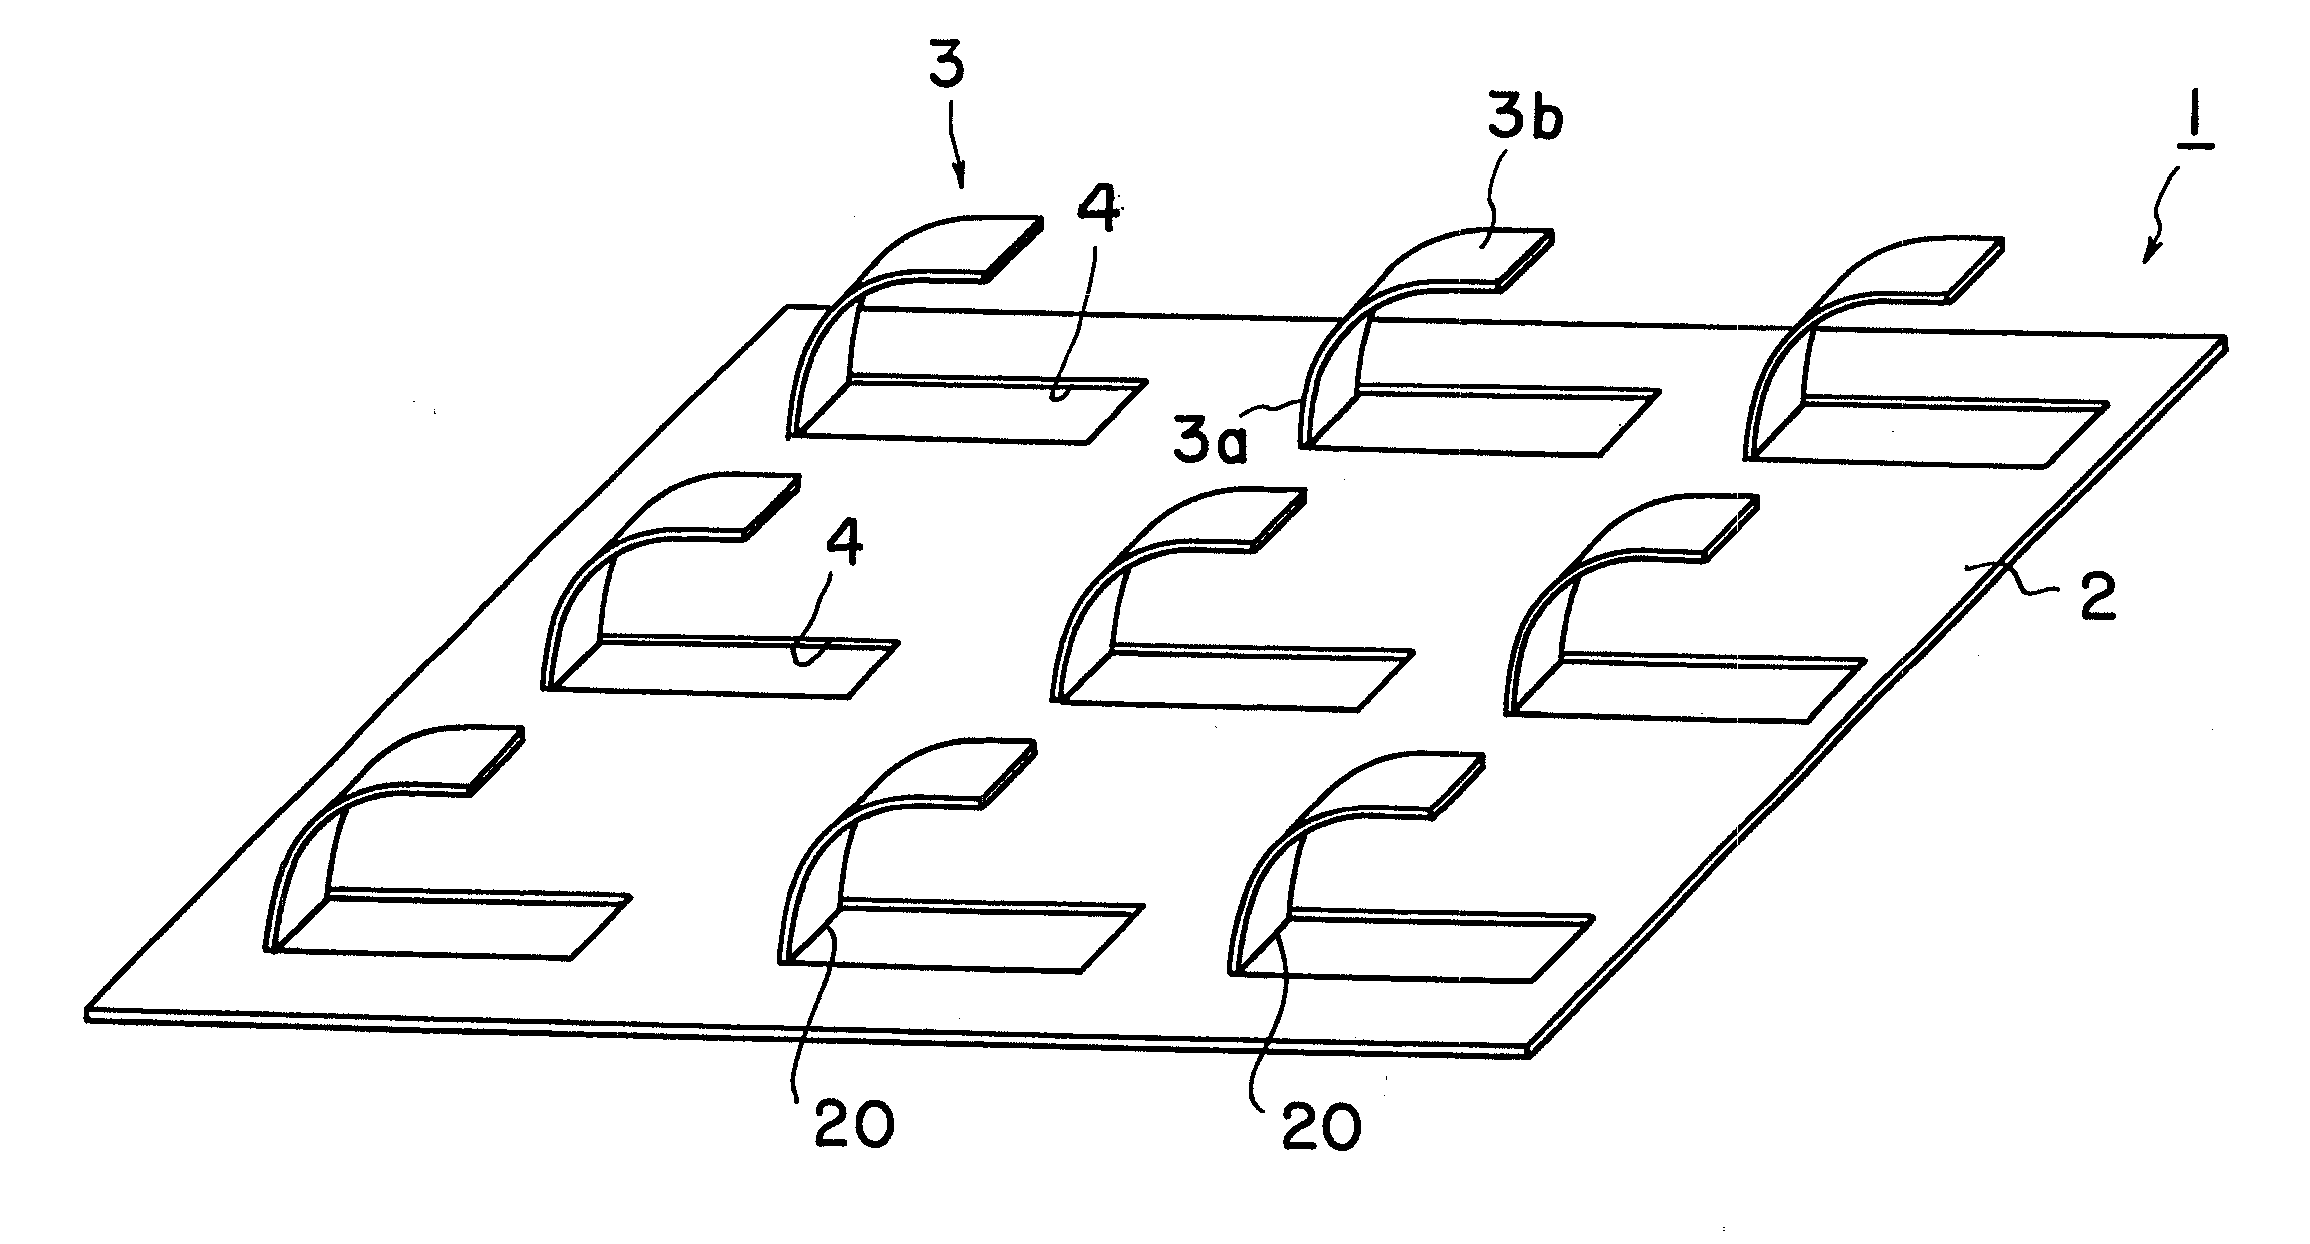 Conductive connecting members and electrochemical systems